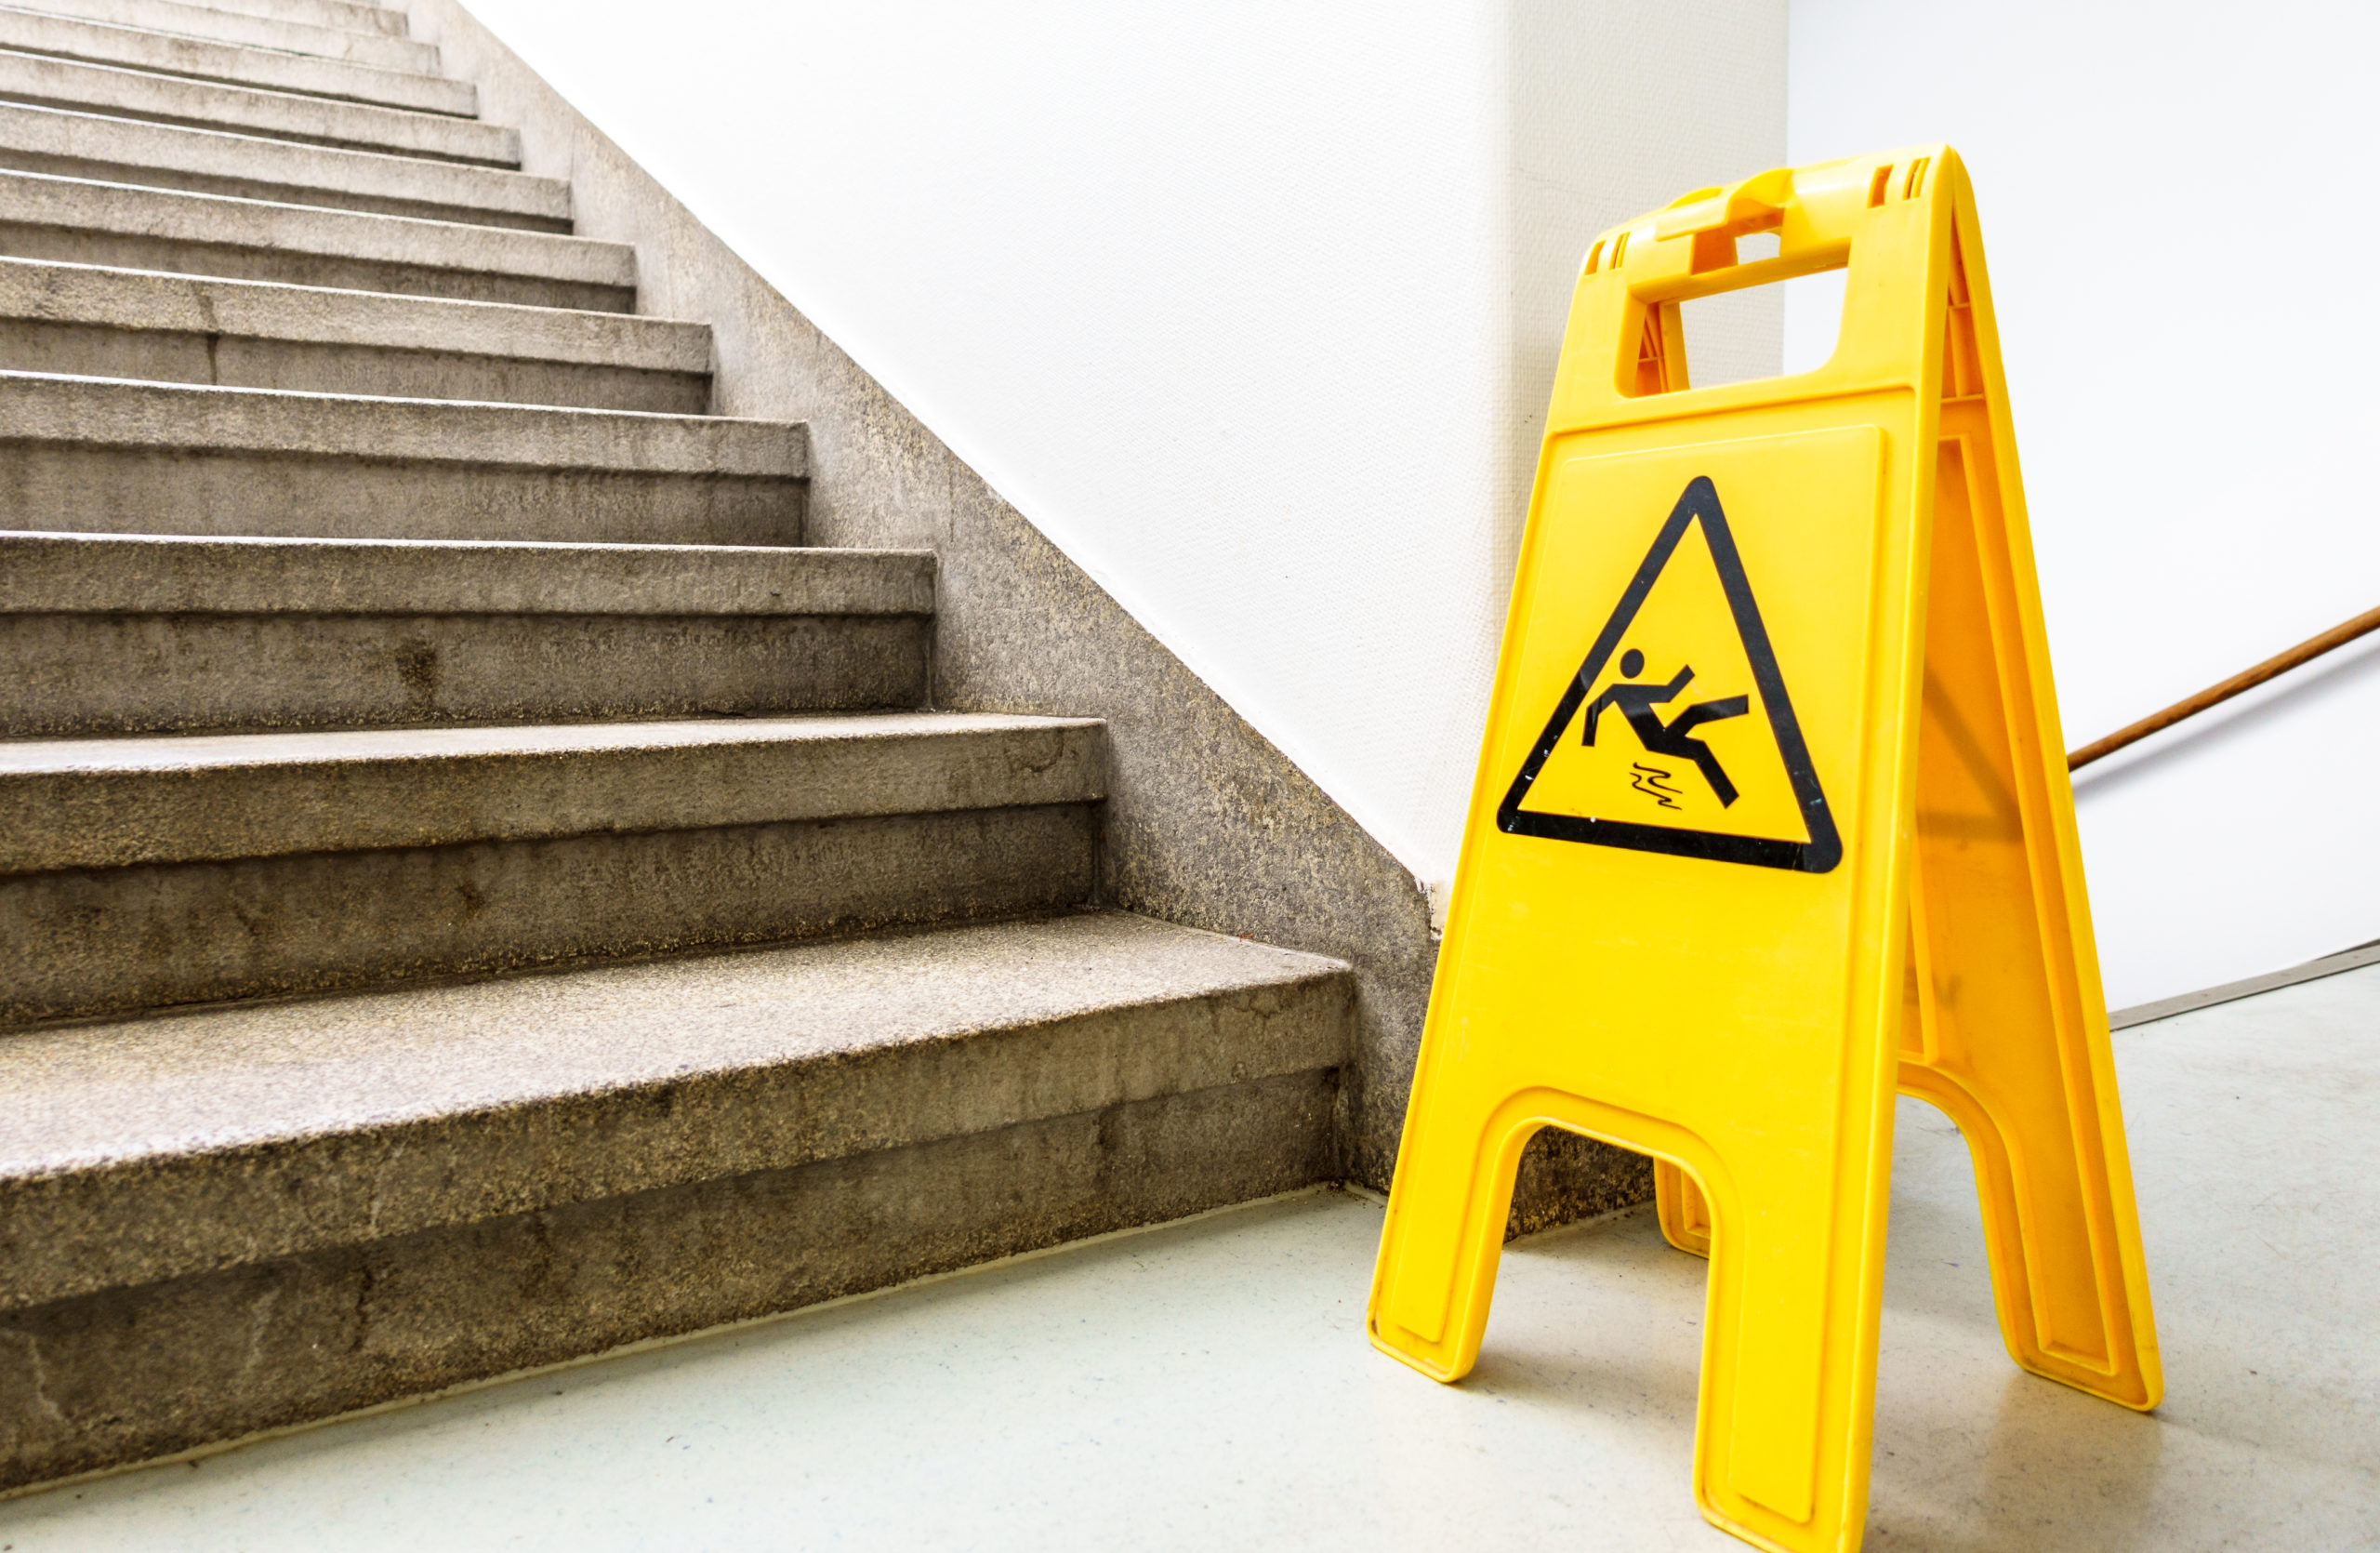 a wet floor warning sign in a stairwell, premises liability theme